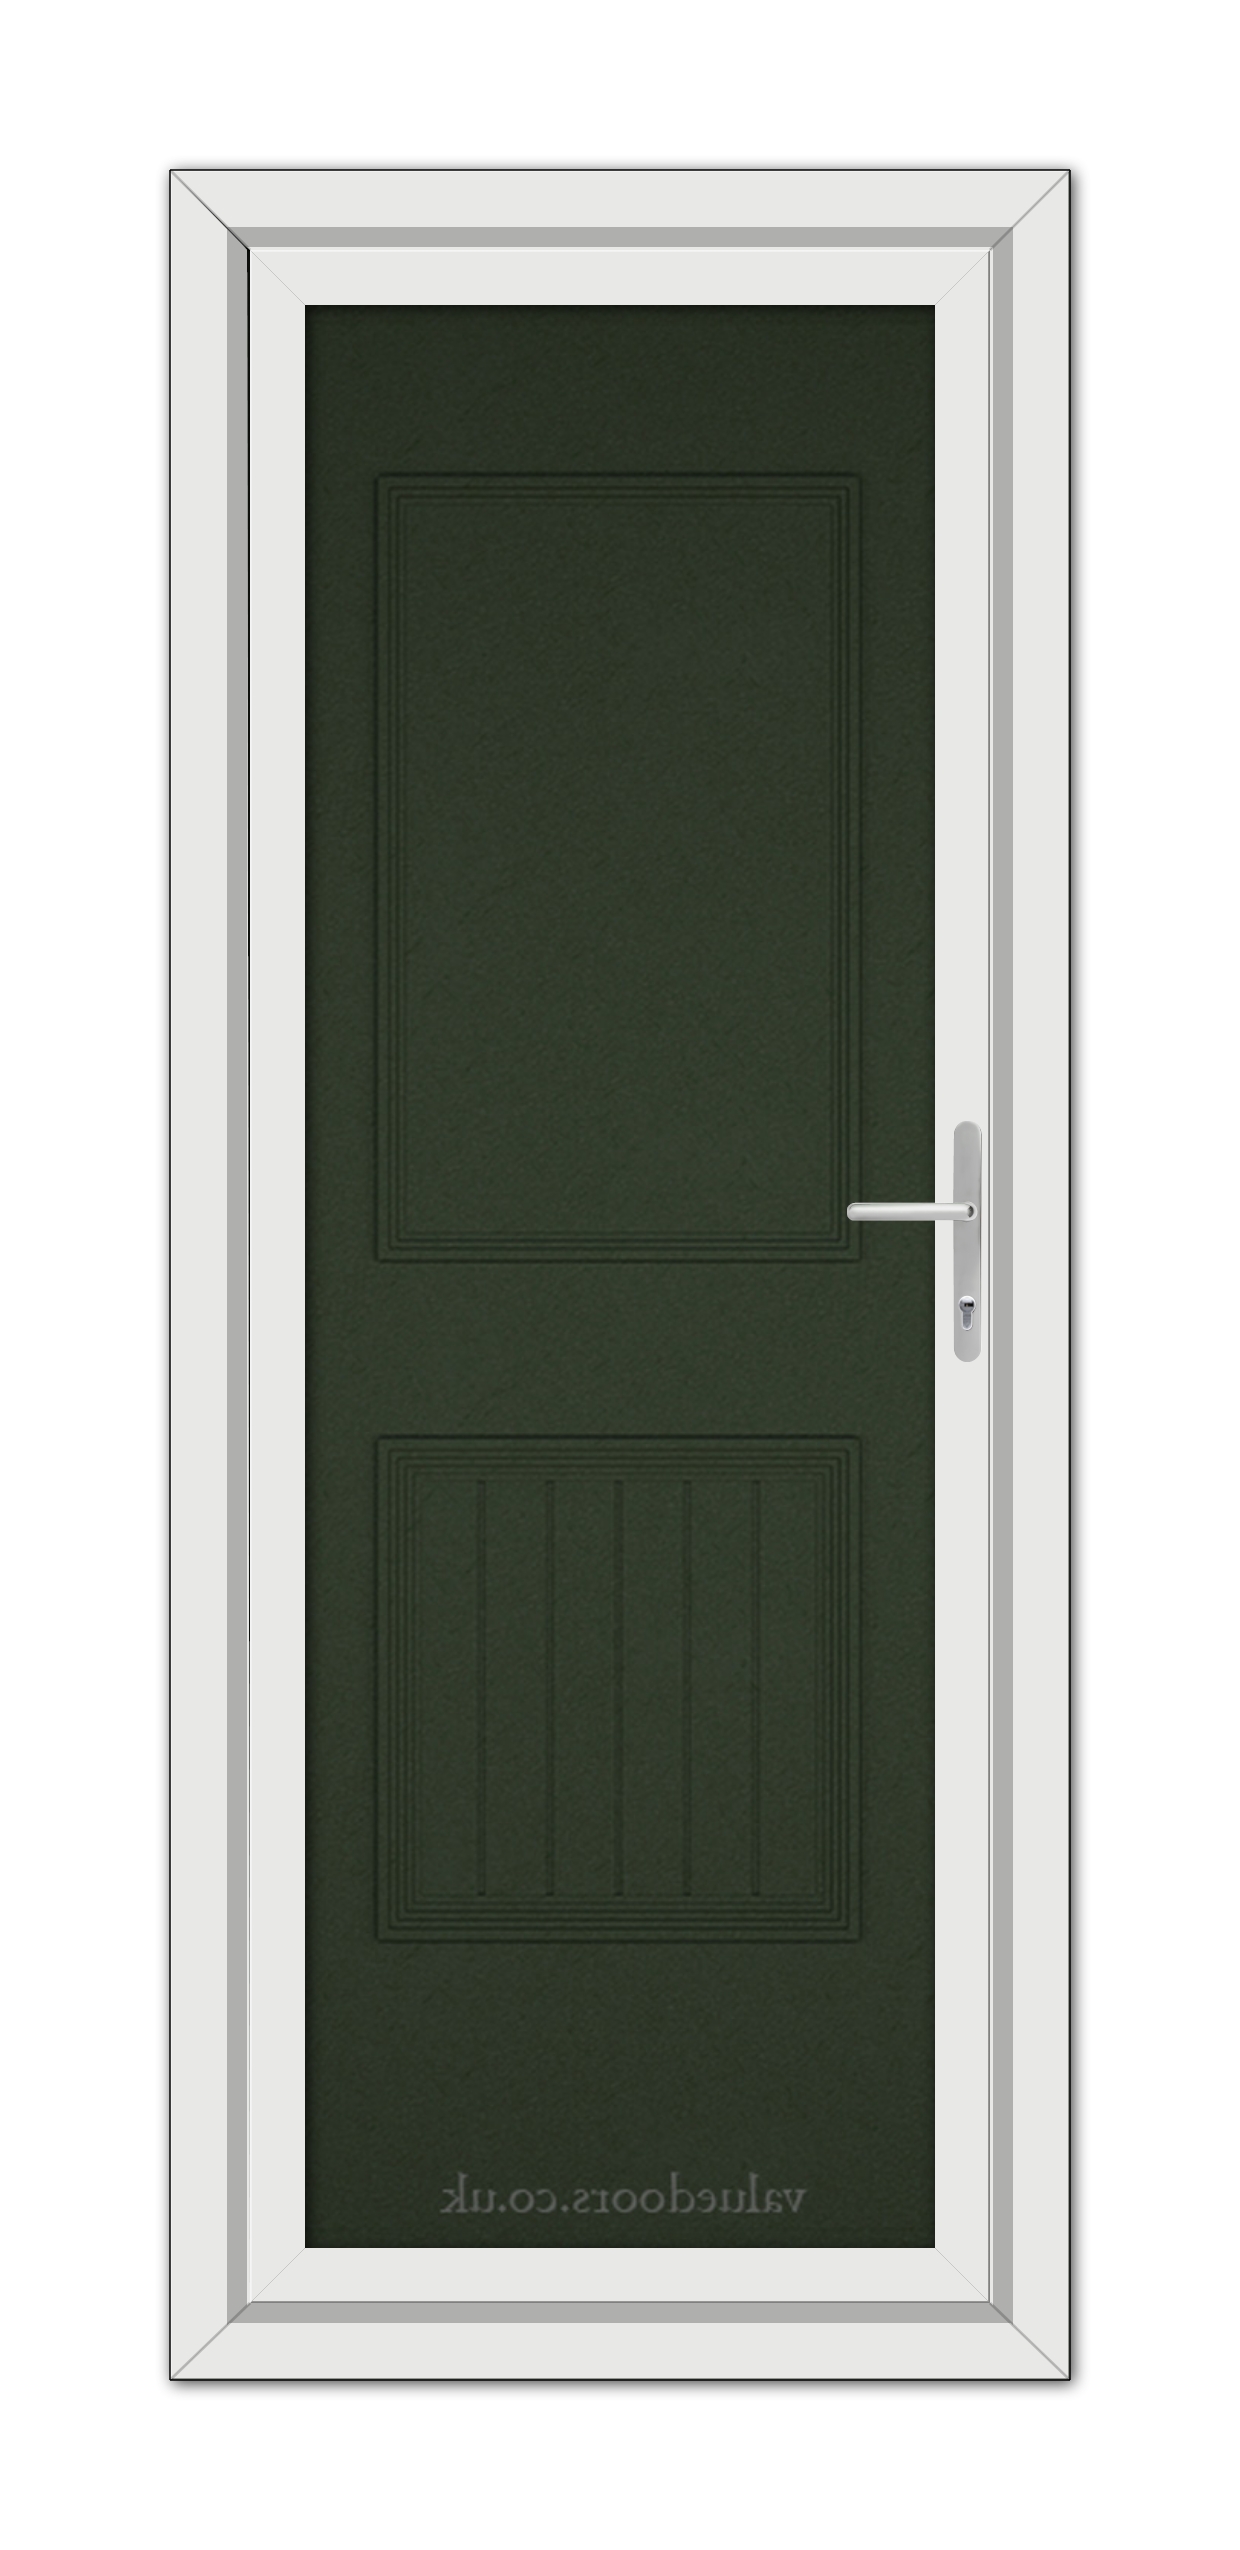 A vertical image of a closed Green Alnwick One Solid uPVC door with a silver handle, set within a white door frame. The door has two recessed panels.